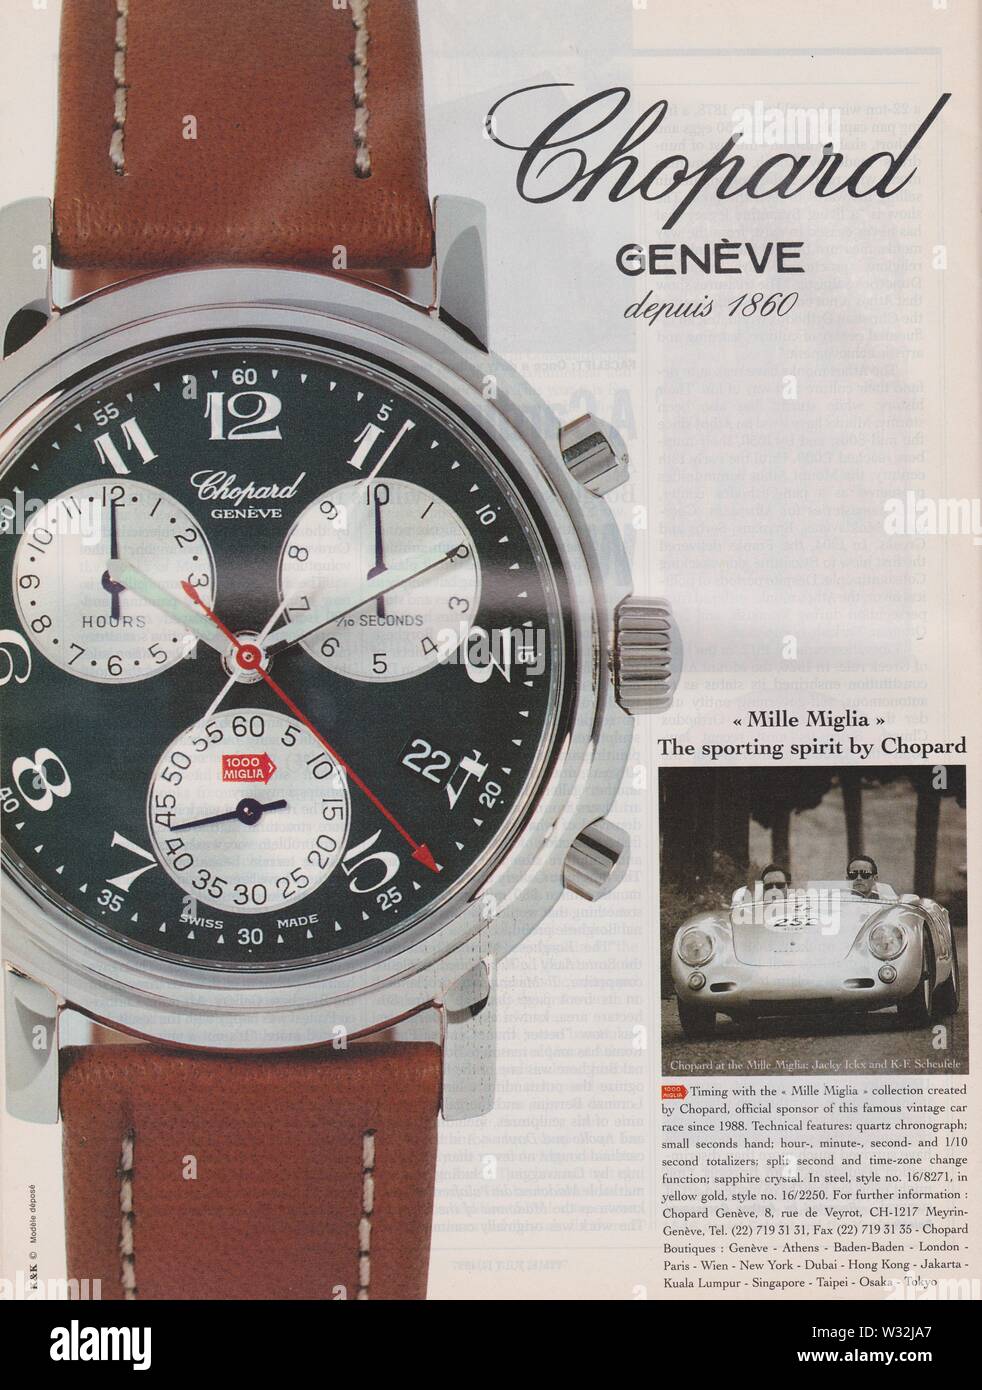 poster advertising Chopard Geneve watch, in magazine from 1997 year, Mille Miglia offical sponsor, slogan, advertisement, creative Chopard advert Stock Photo